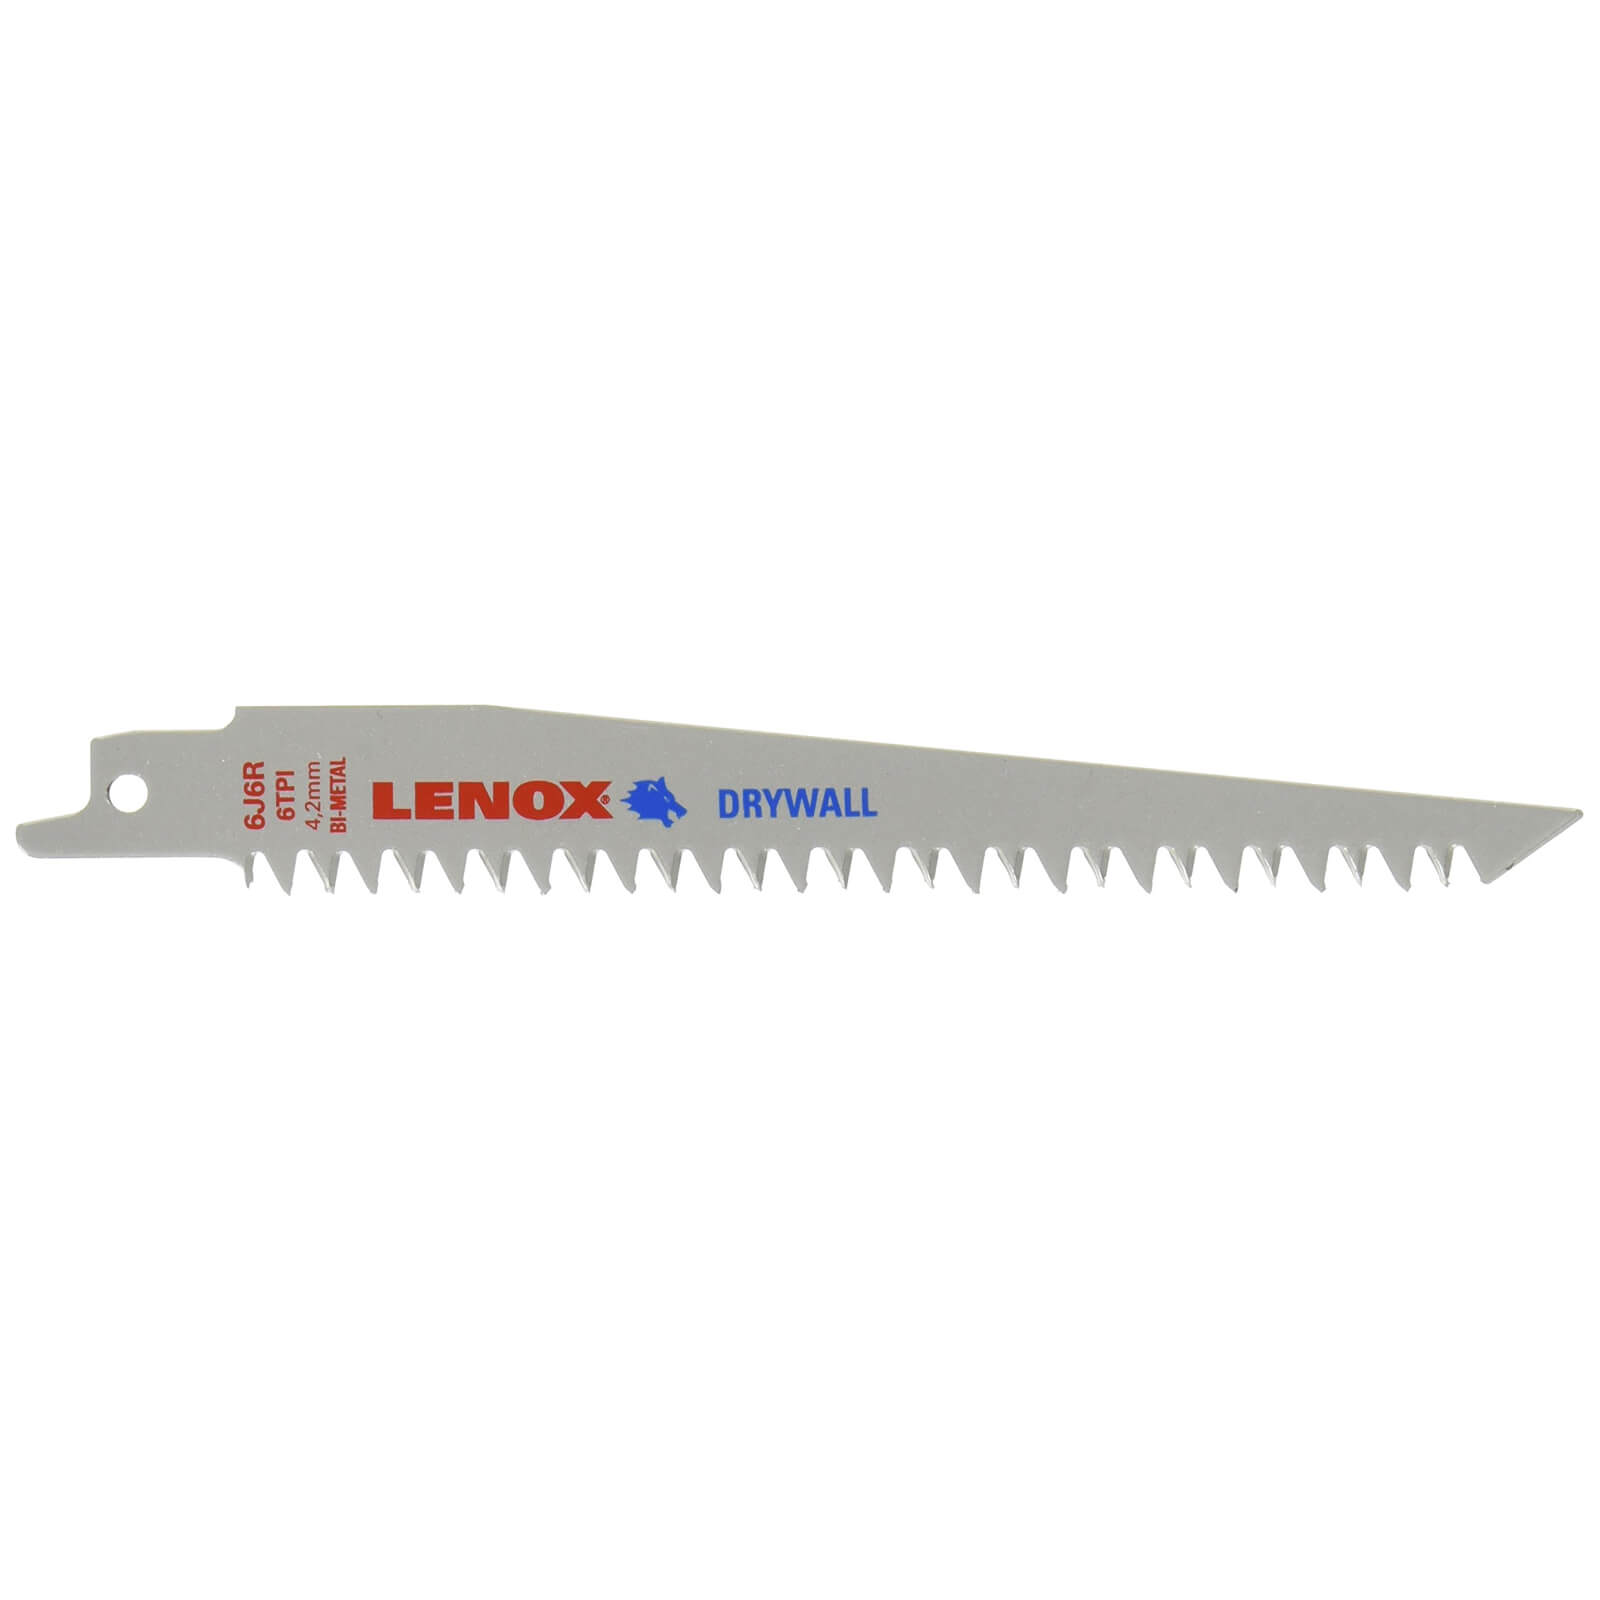 Image of Lenox Plaster Cutting Reciprocating Sabre Saw Blades 152mm Pack of 1